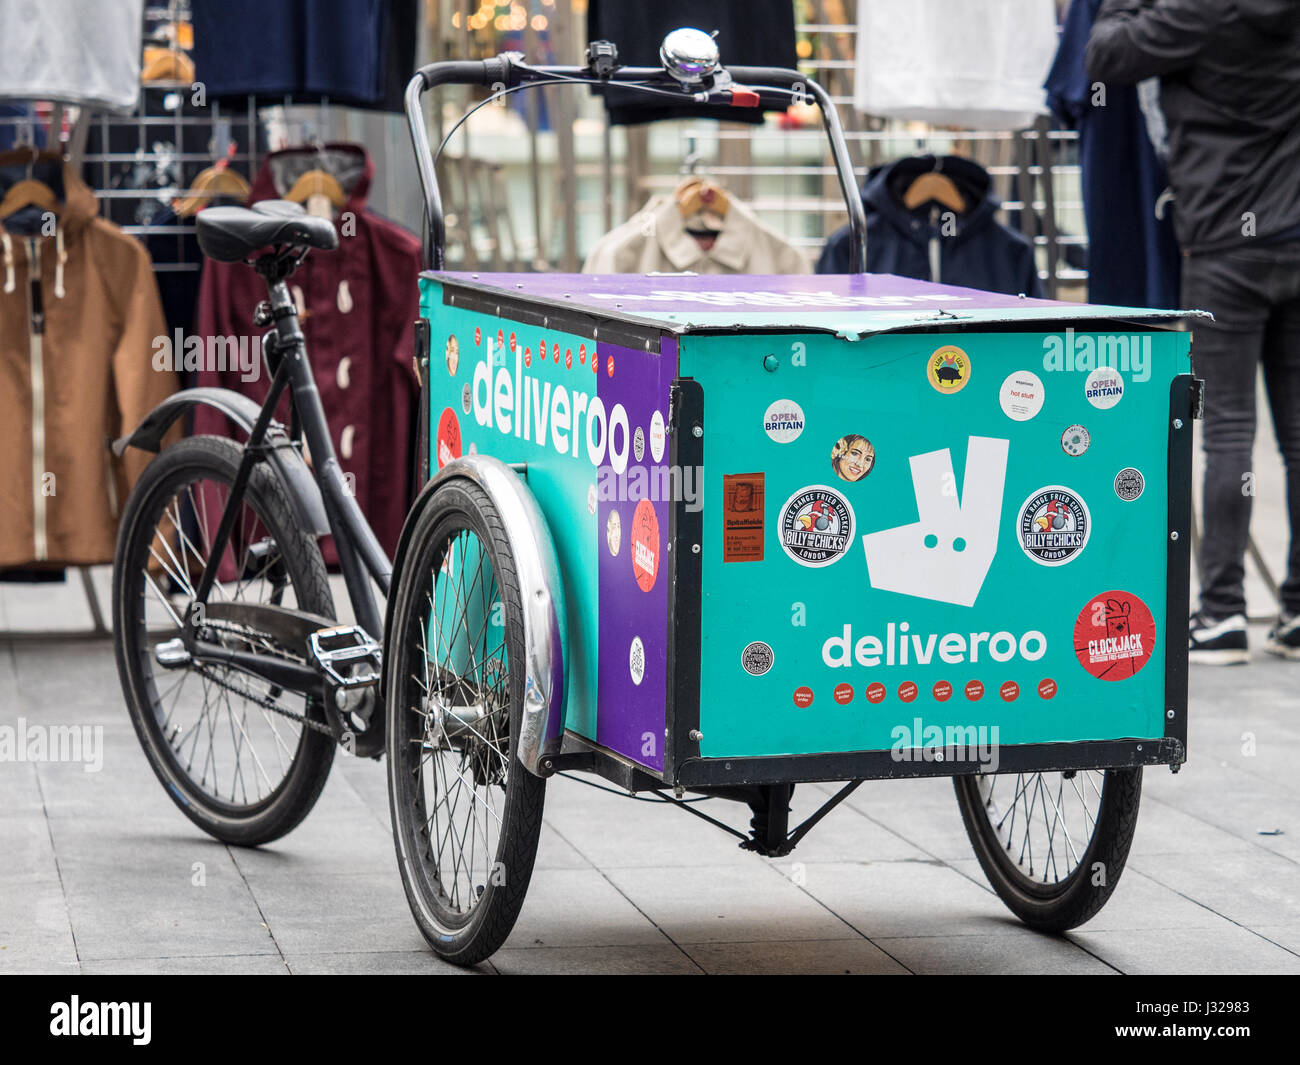 A large capacity Deliveroo cargo bike parked in Central London. Deliveroo is one of the firms in the competitive food delivery business in the UK. Stock Photo